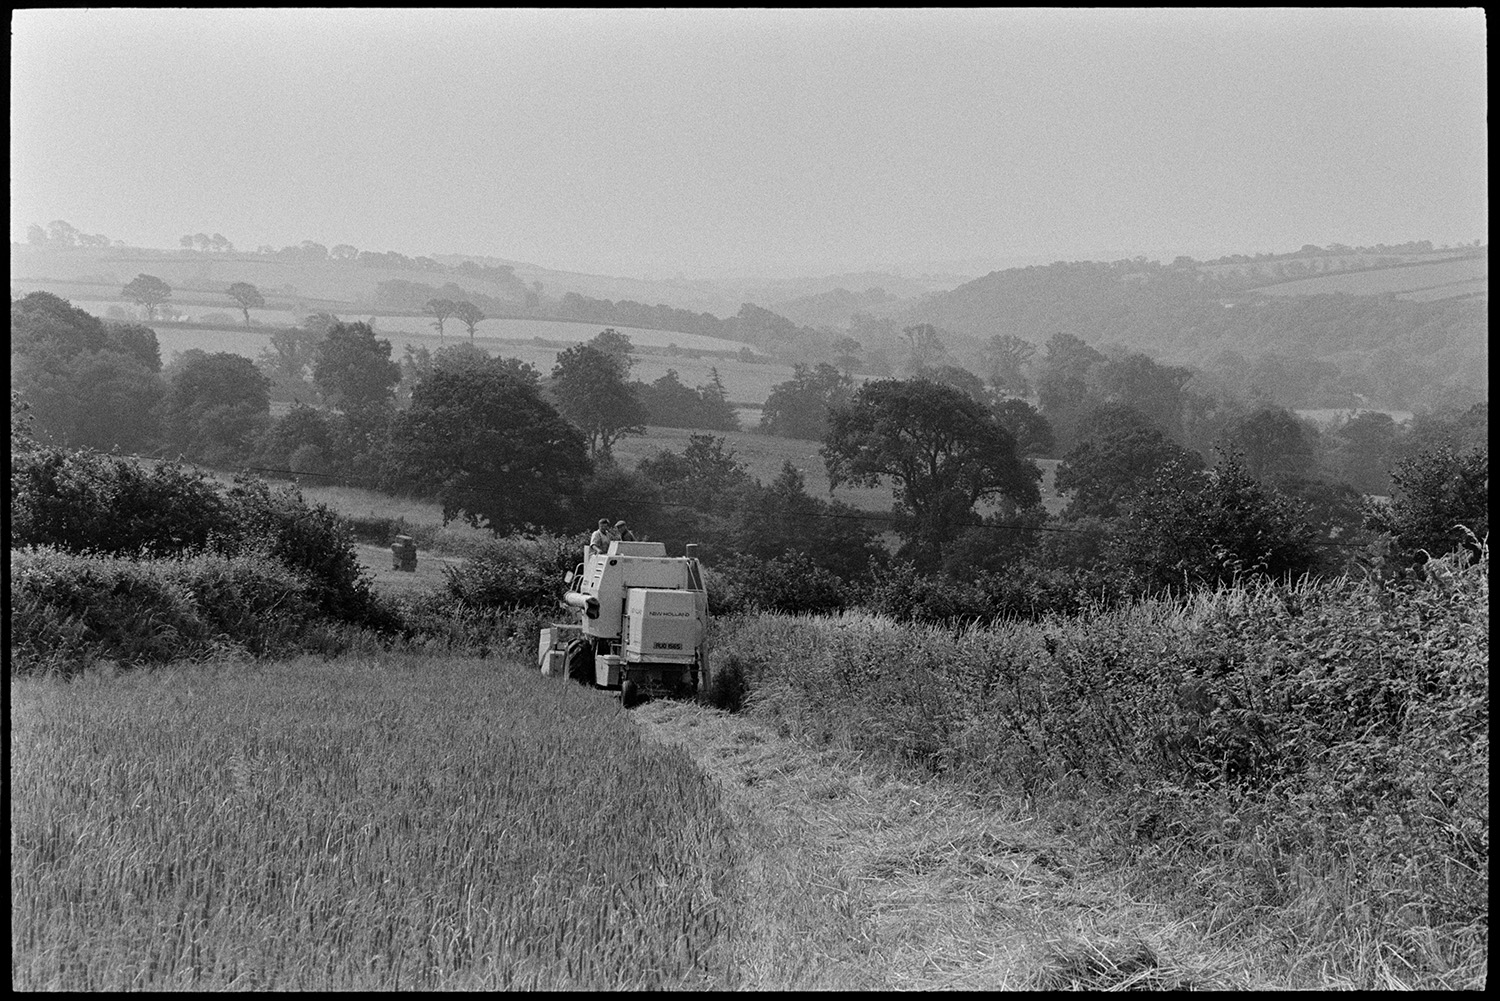 Combine harvester working in landscape. 
[Two men driving a combine harvester alongside a hedge in a field at Brightley, Dolton, to harvest a crop. A landscape of trees and fields can be seen in the background. A stack of hay bales can be seen in one of the fields.]